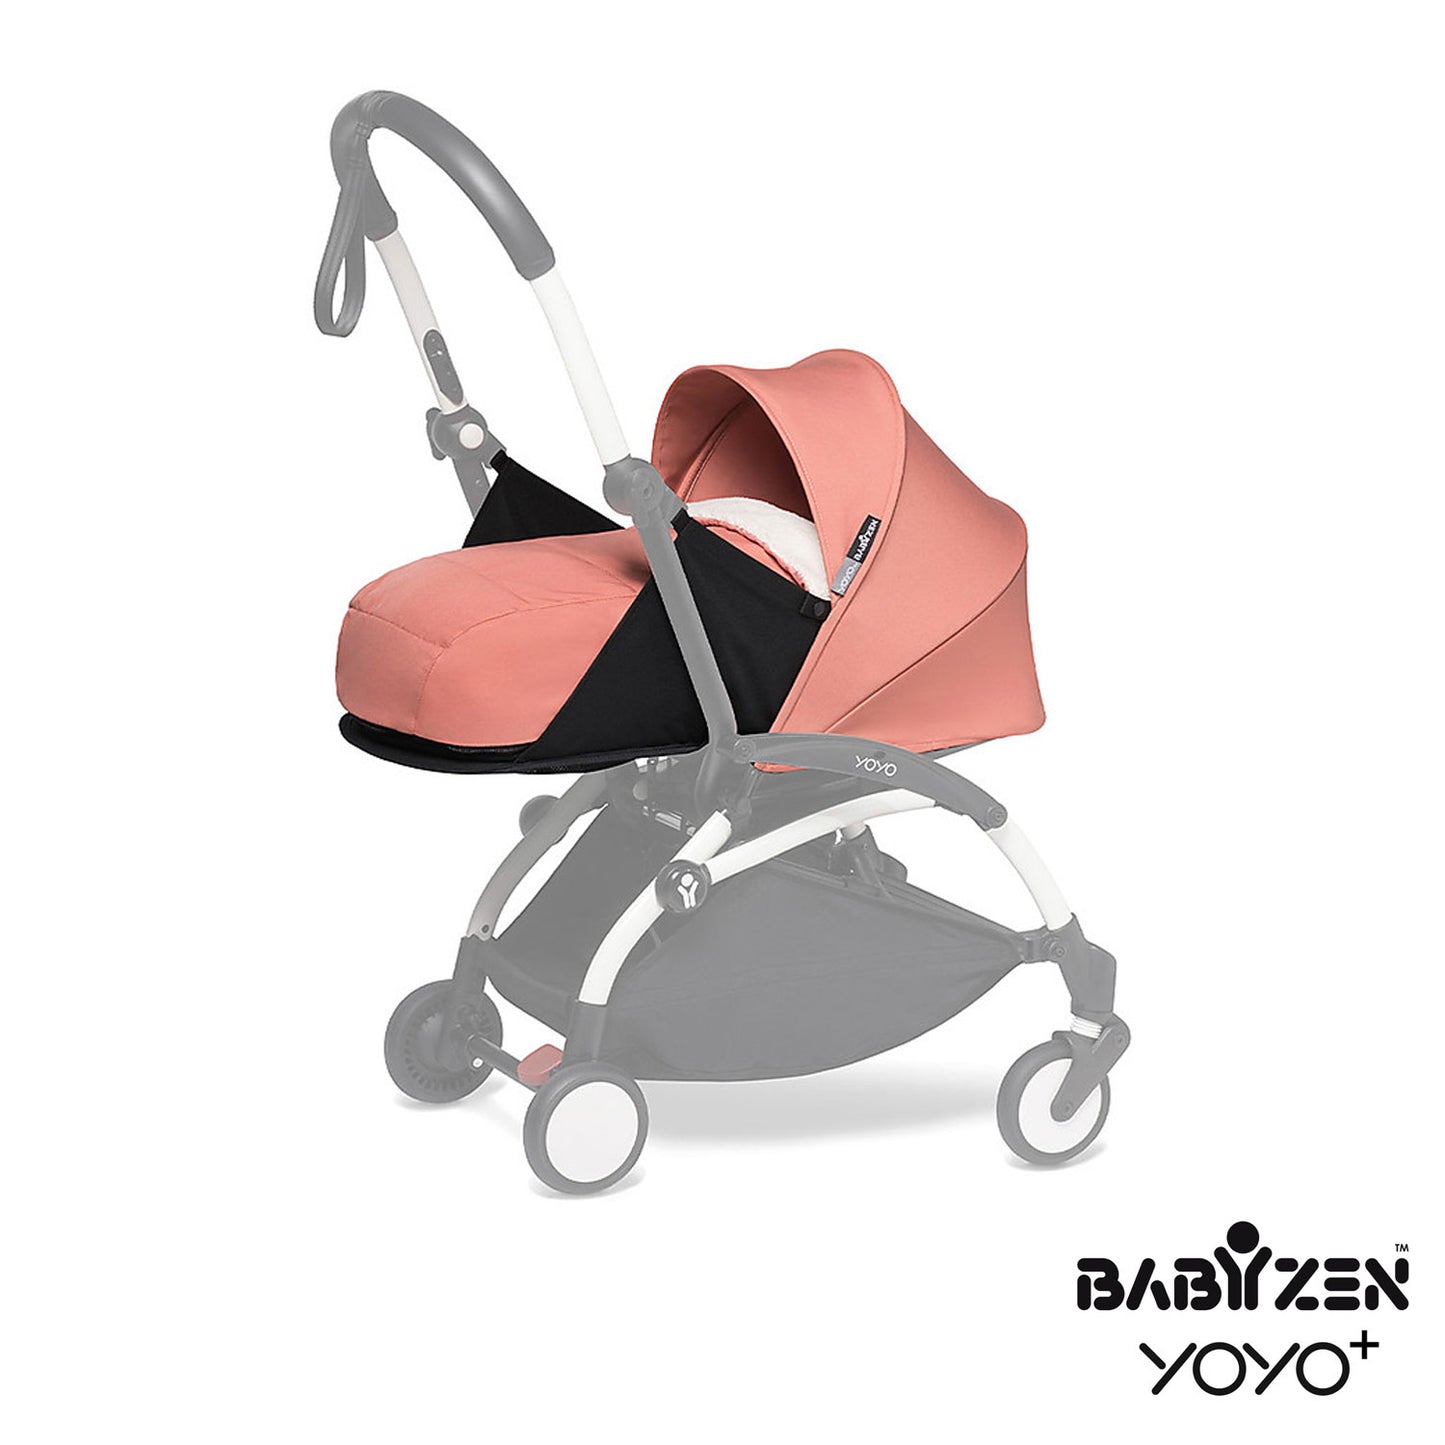 Babyzen - New Cover and hammock for Yoyo 0+ carrycot